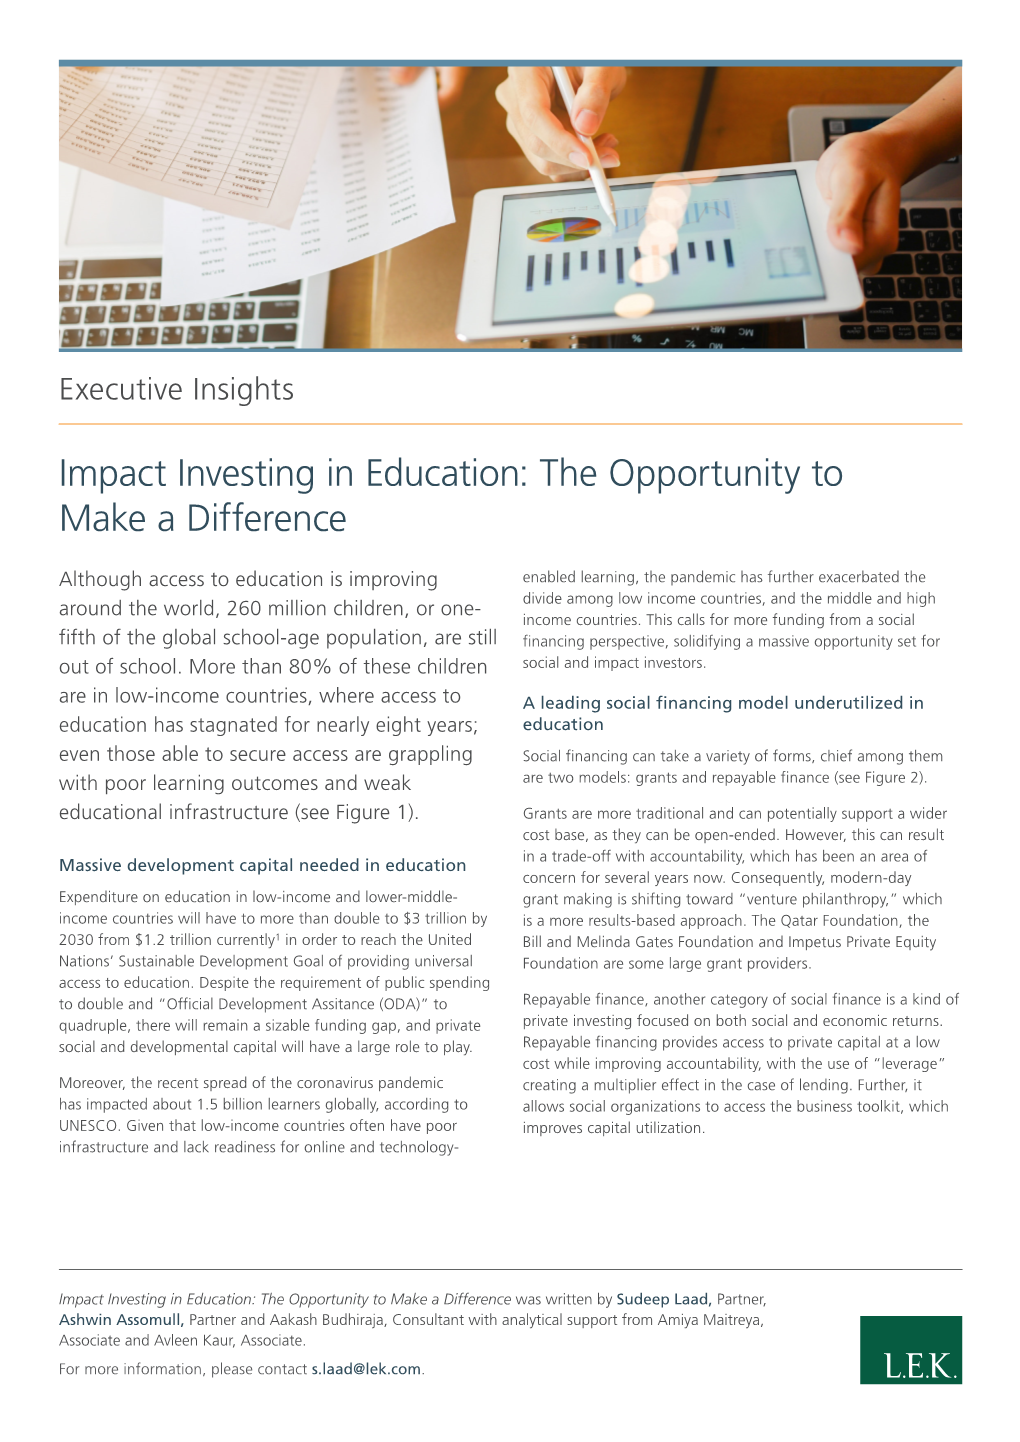 Impact Investing in Education: the Opportunity to Make a Difference